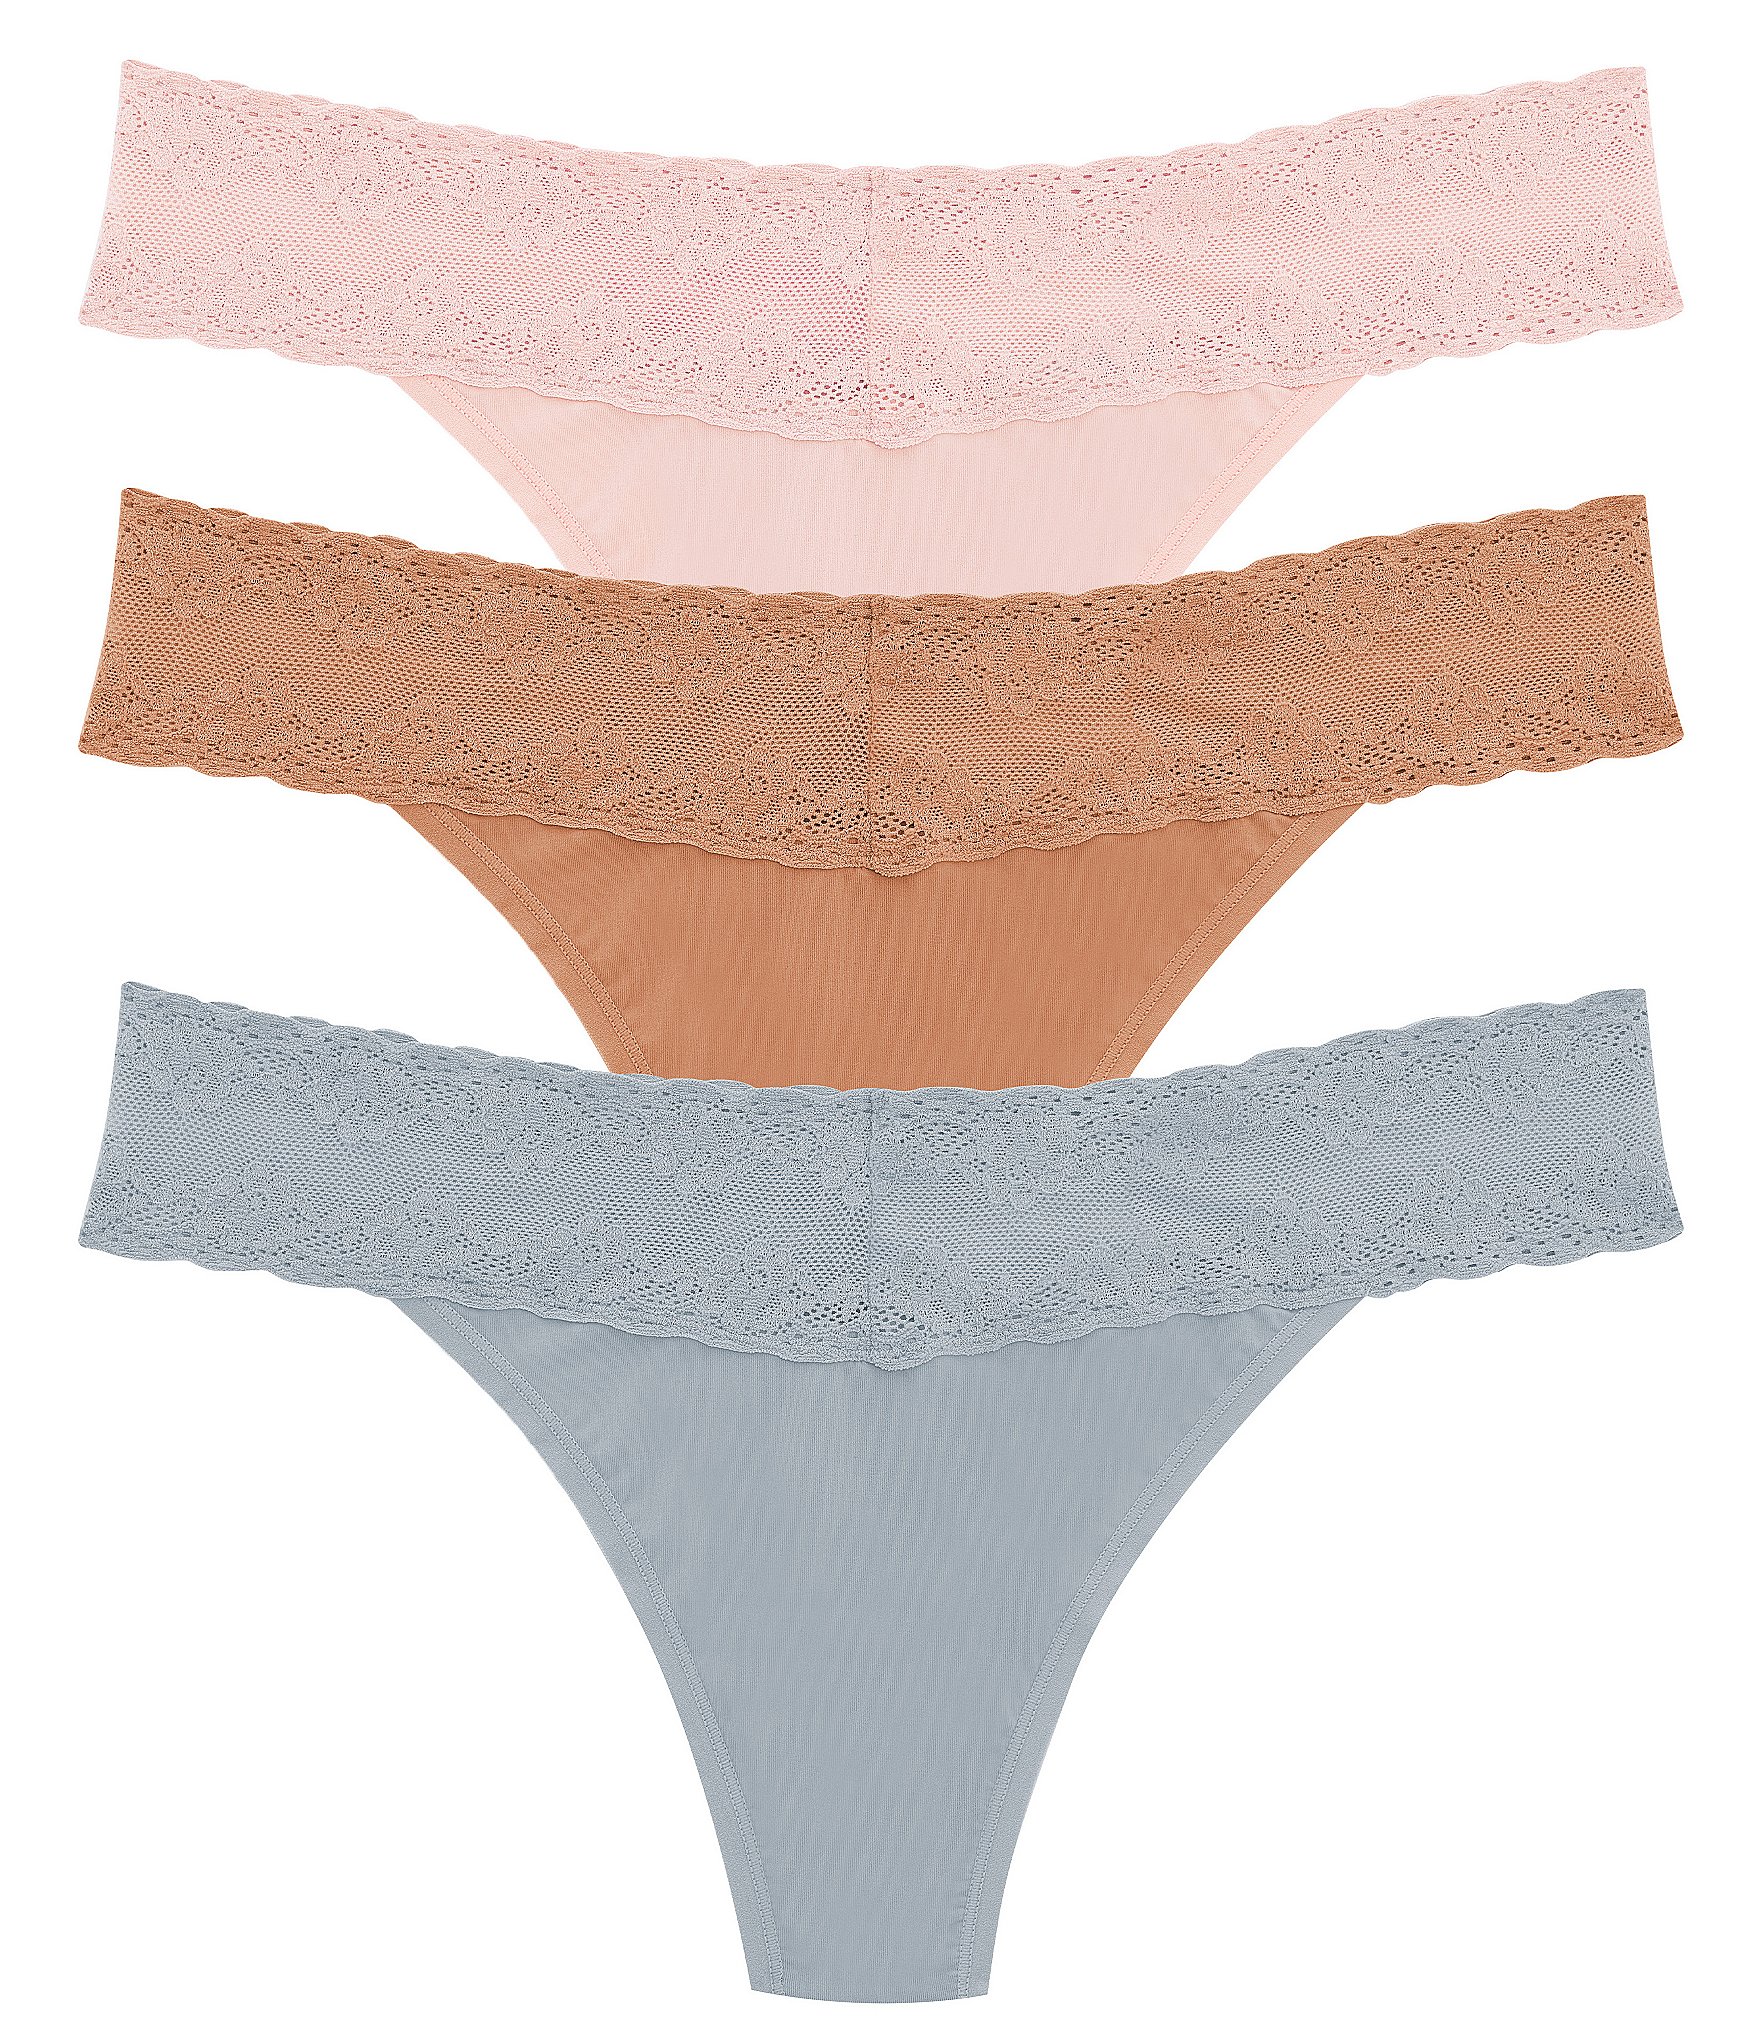 bliss perfecting: Lingerie